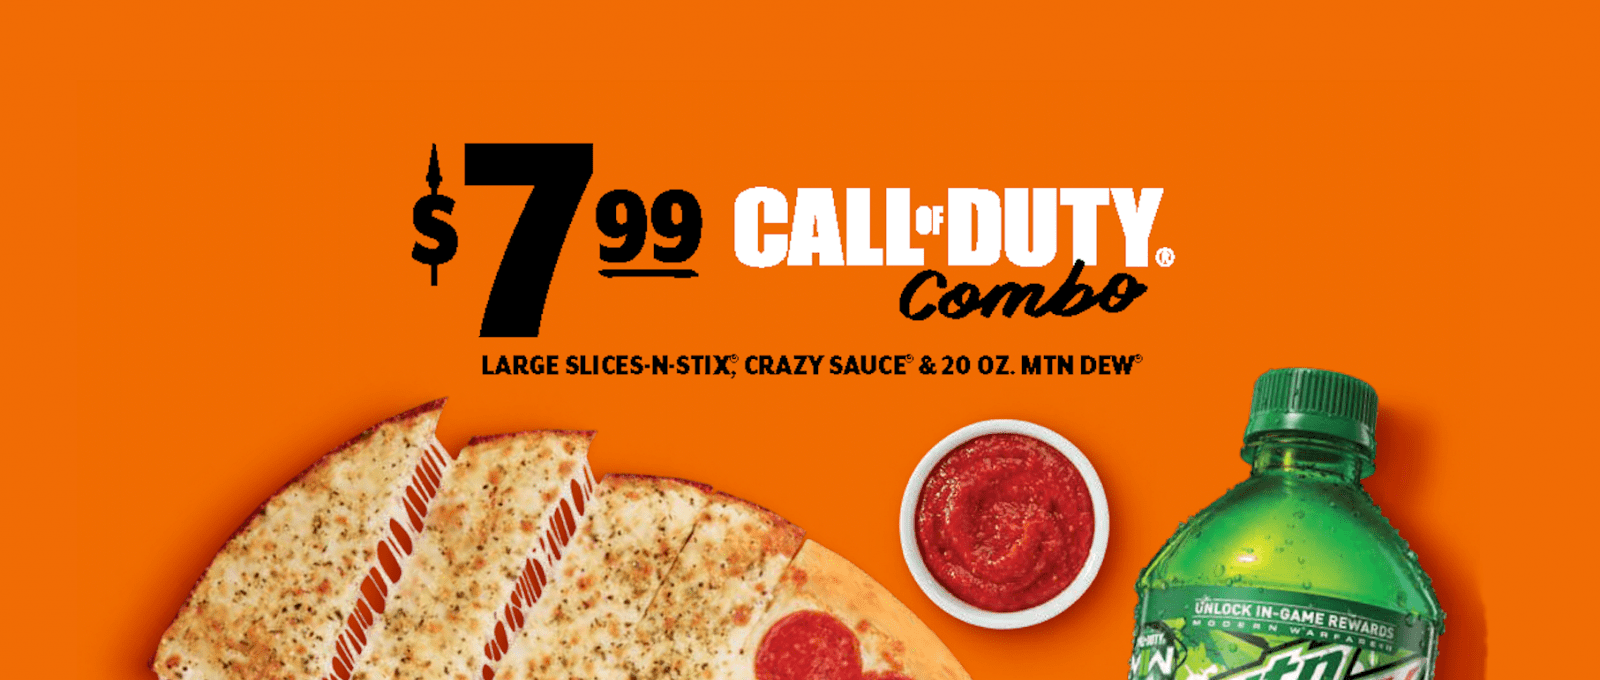 Little Caesars and MTN DEW Announce Gaming Combo and InGame Items